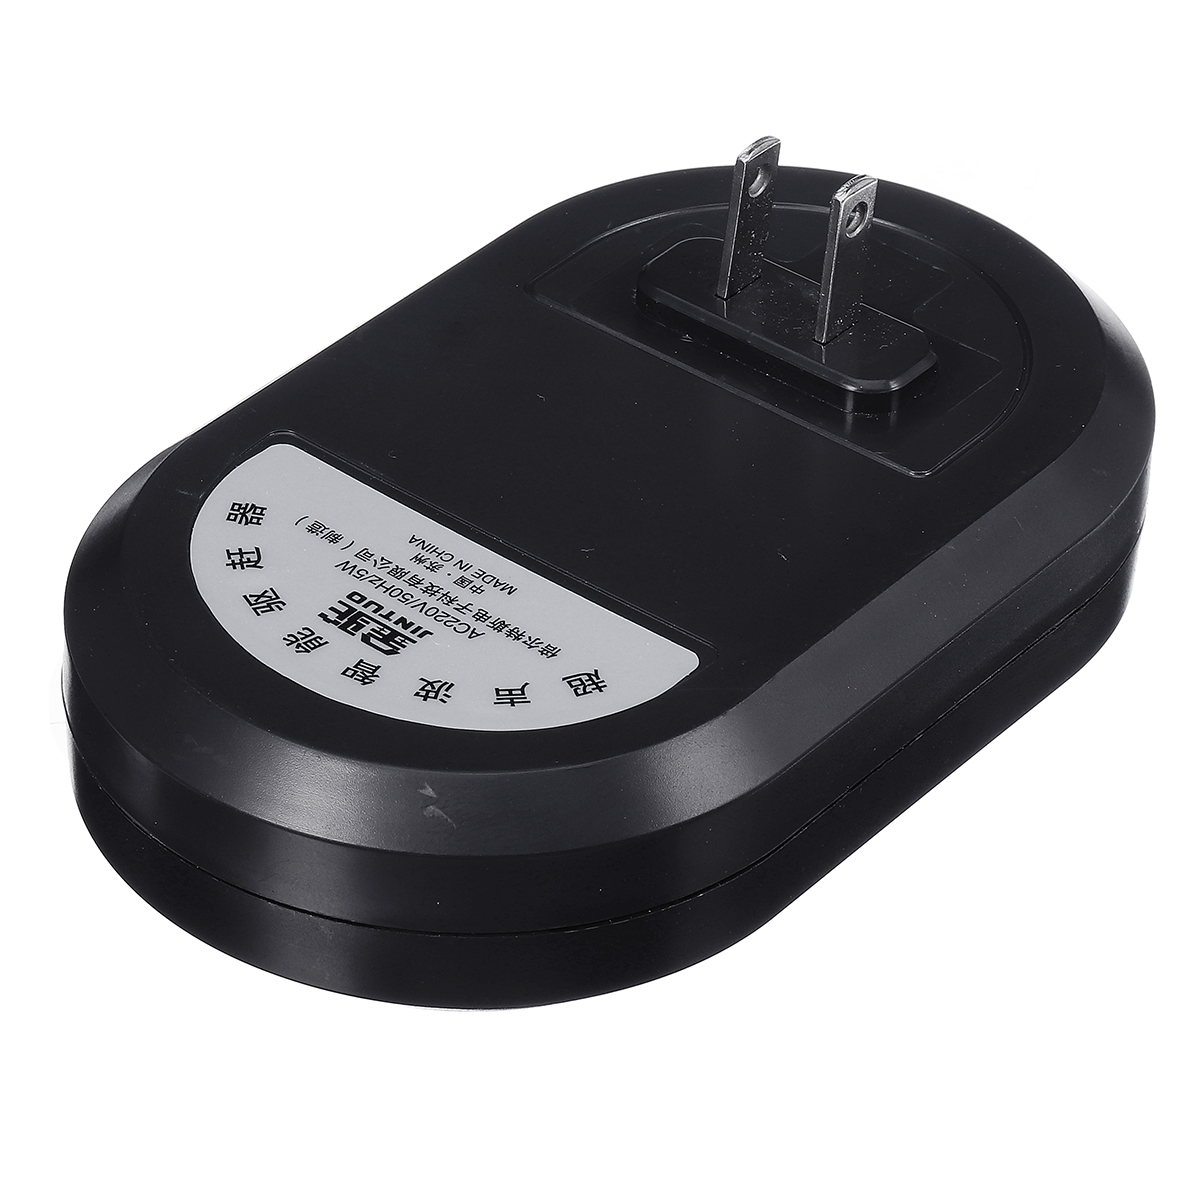 Mini-Portable-Ultrasonic-Pest-Repellent-Cleaner-Electronic-Bug-Repeller-Anti-Dust-Mite-Controller-1447811